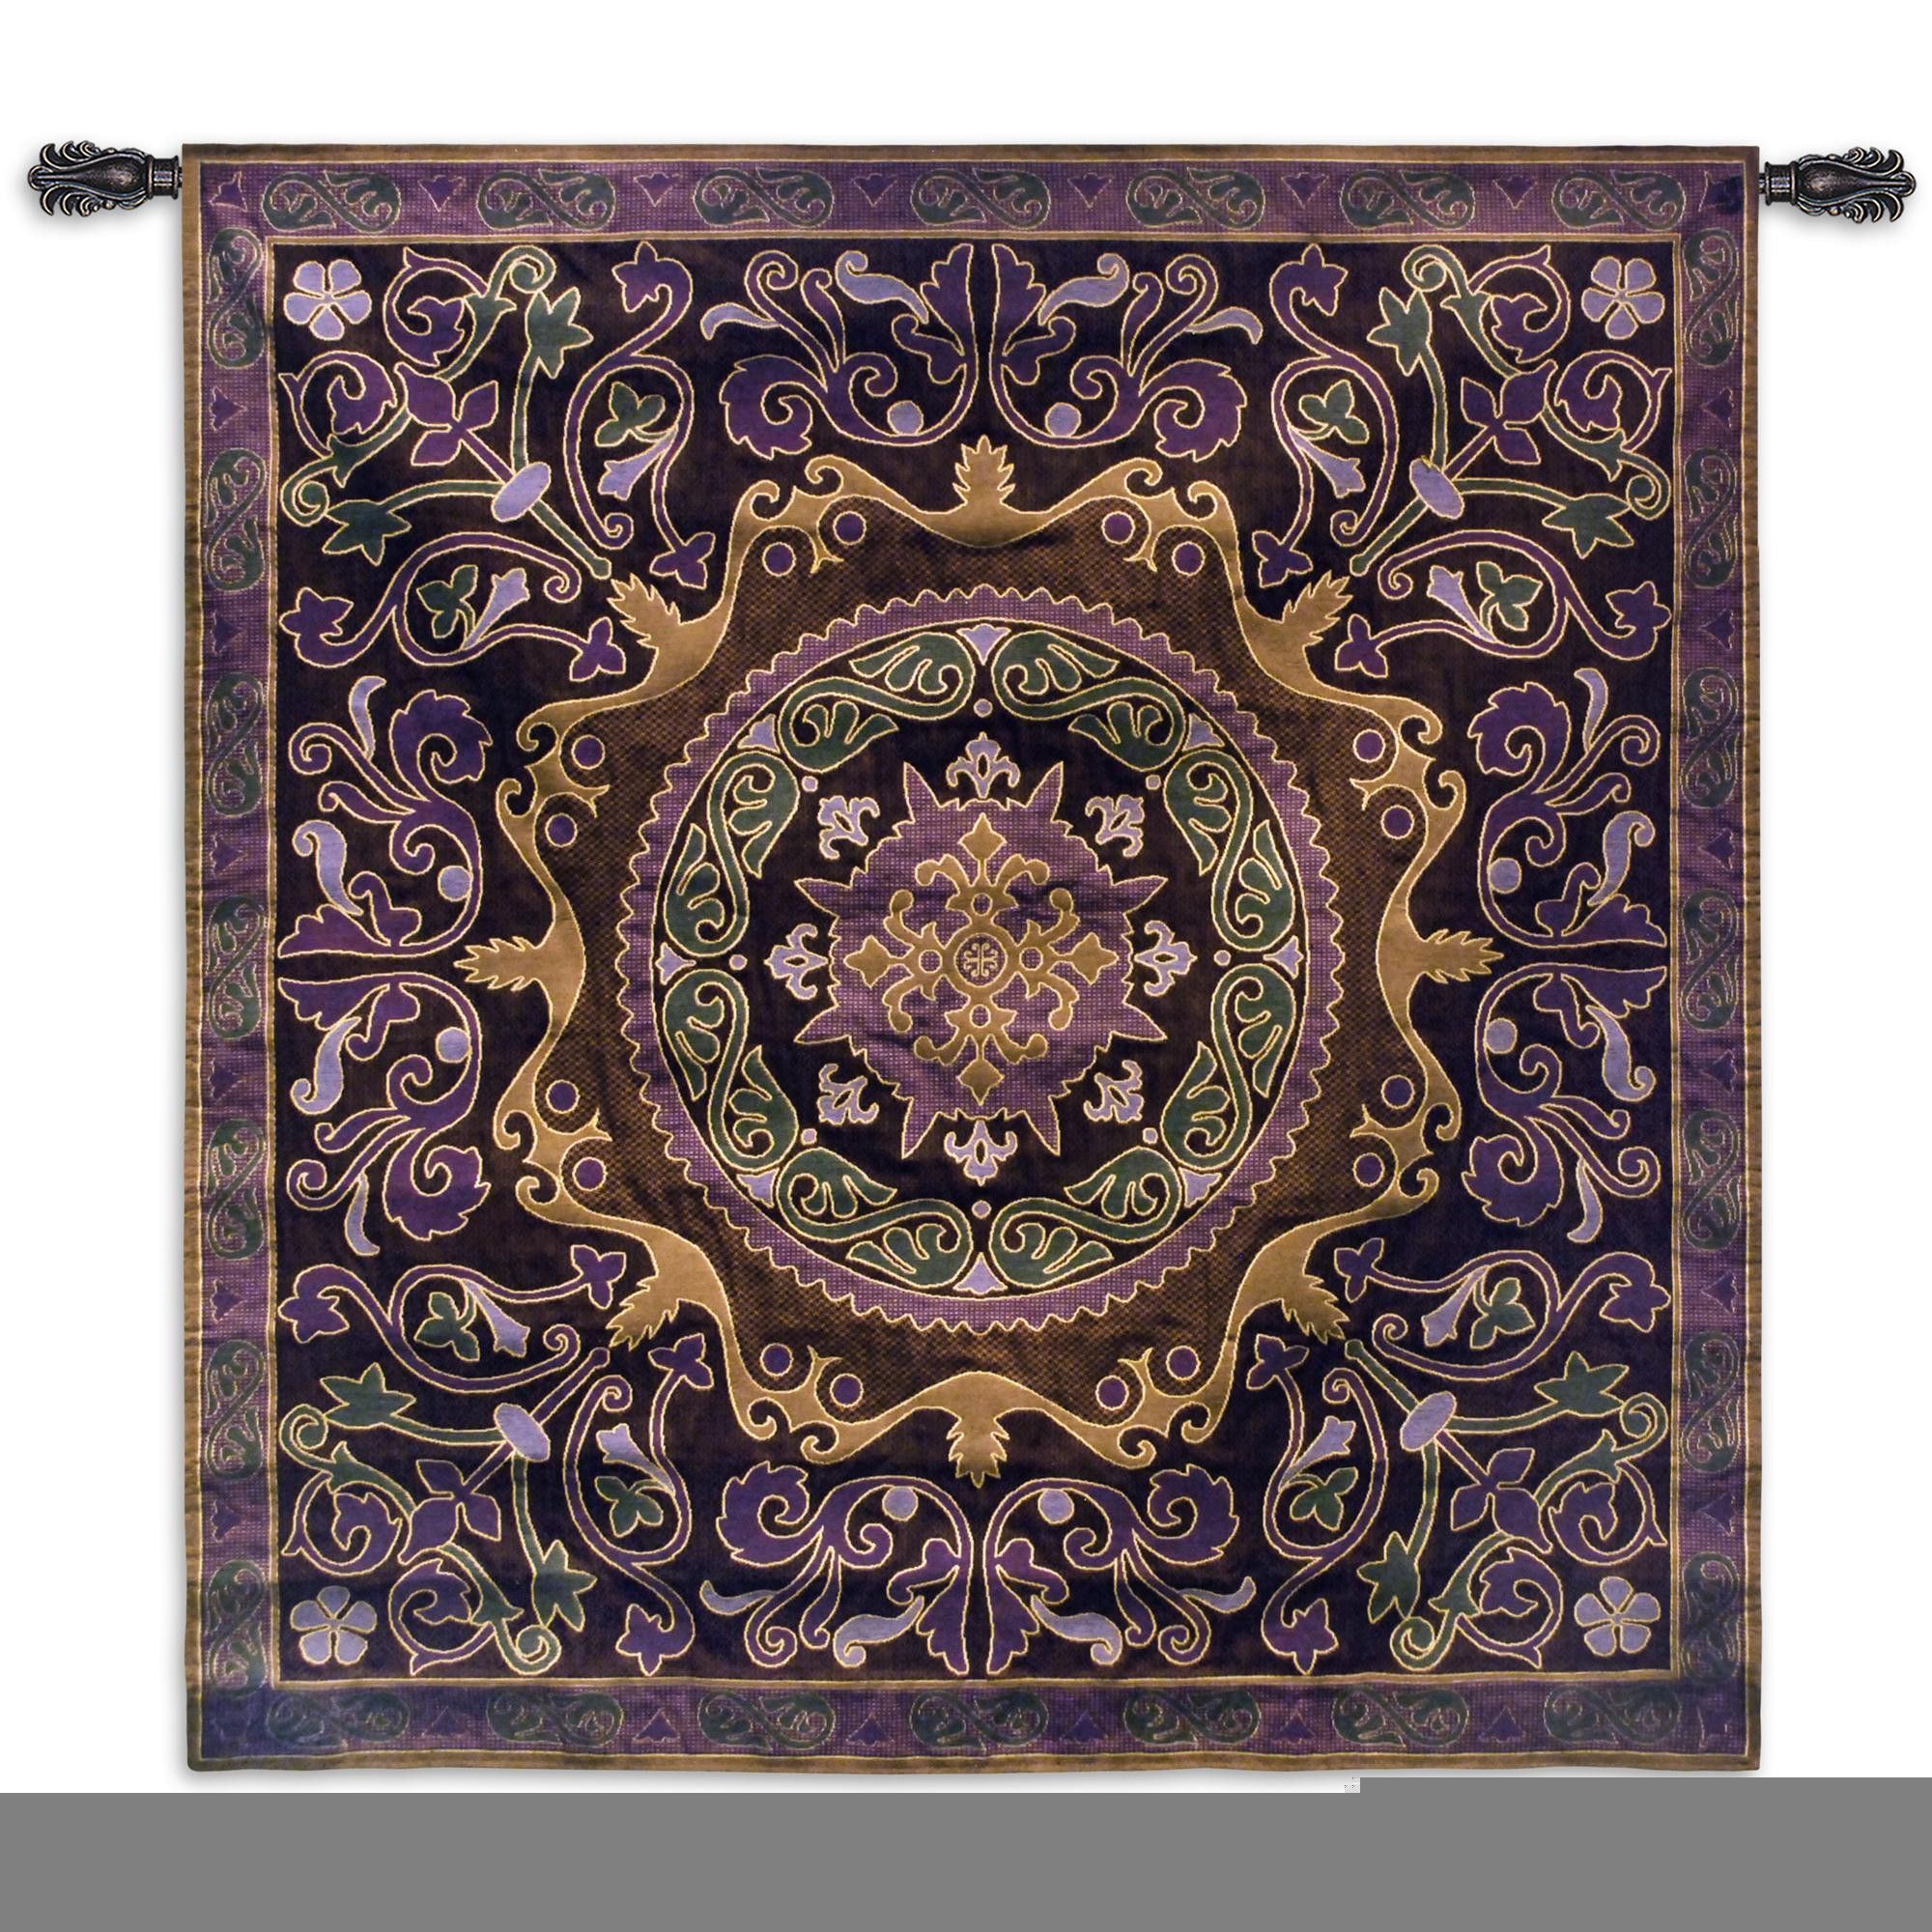 Suzani Passion Small Wall Tapestry | Wall tapestries, Tapestry and ...